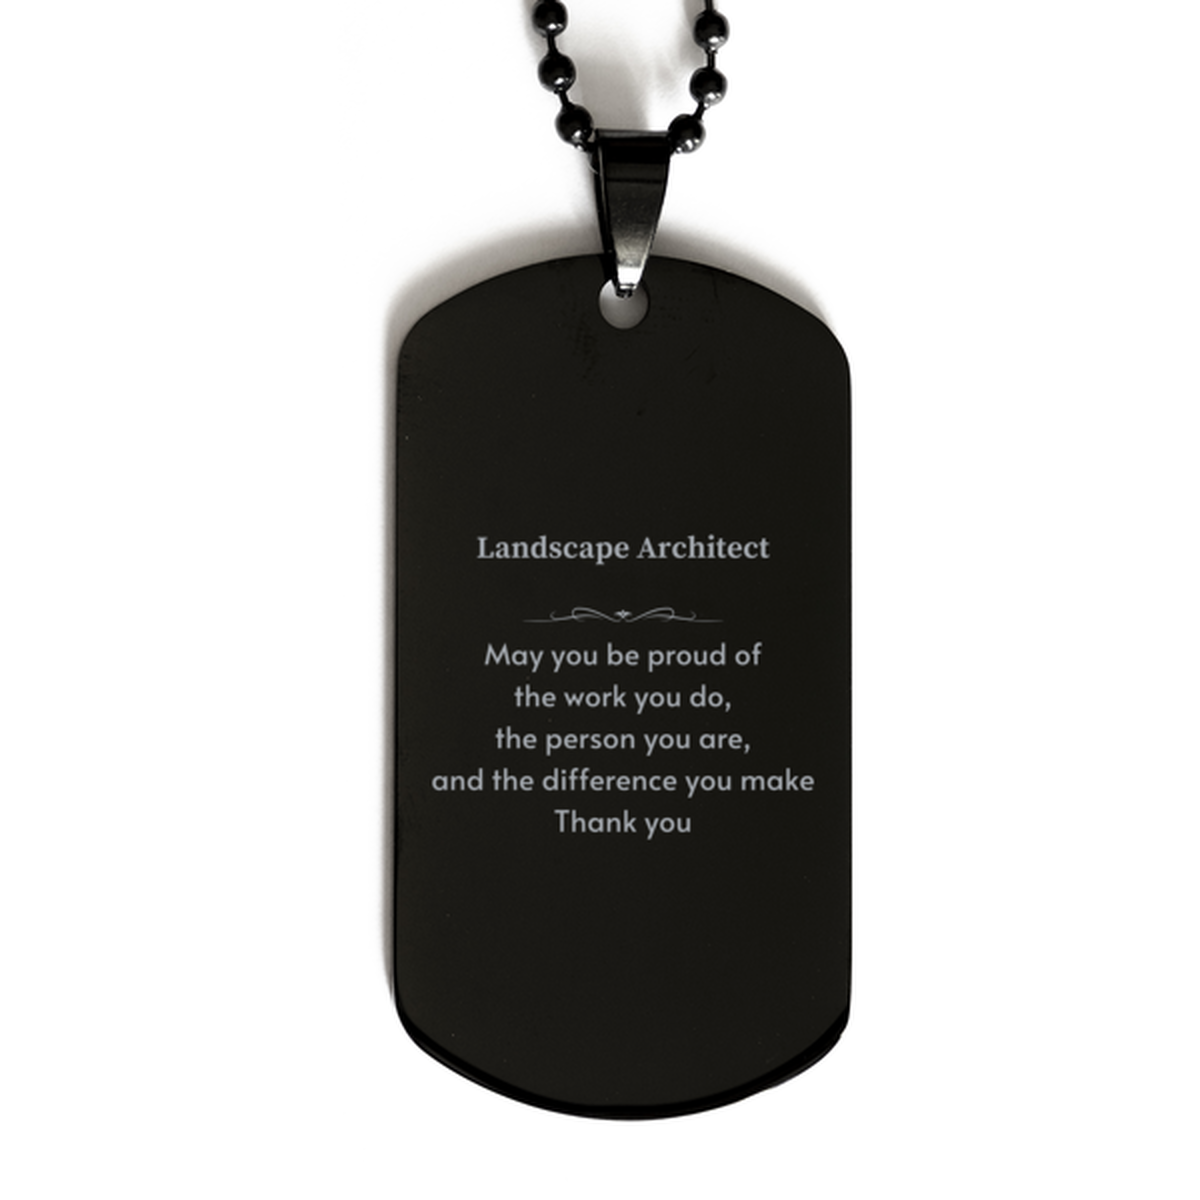 Heartwarming Black Dog Tag Retirement Coworkers Gifts for Landscape Architect, Landscape Architect May You be proud of the work you do, the person you are Gifts for Boss Men Women Friends